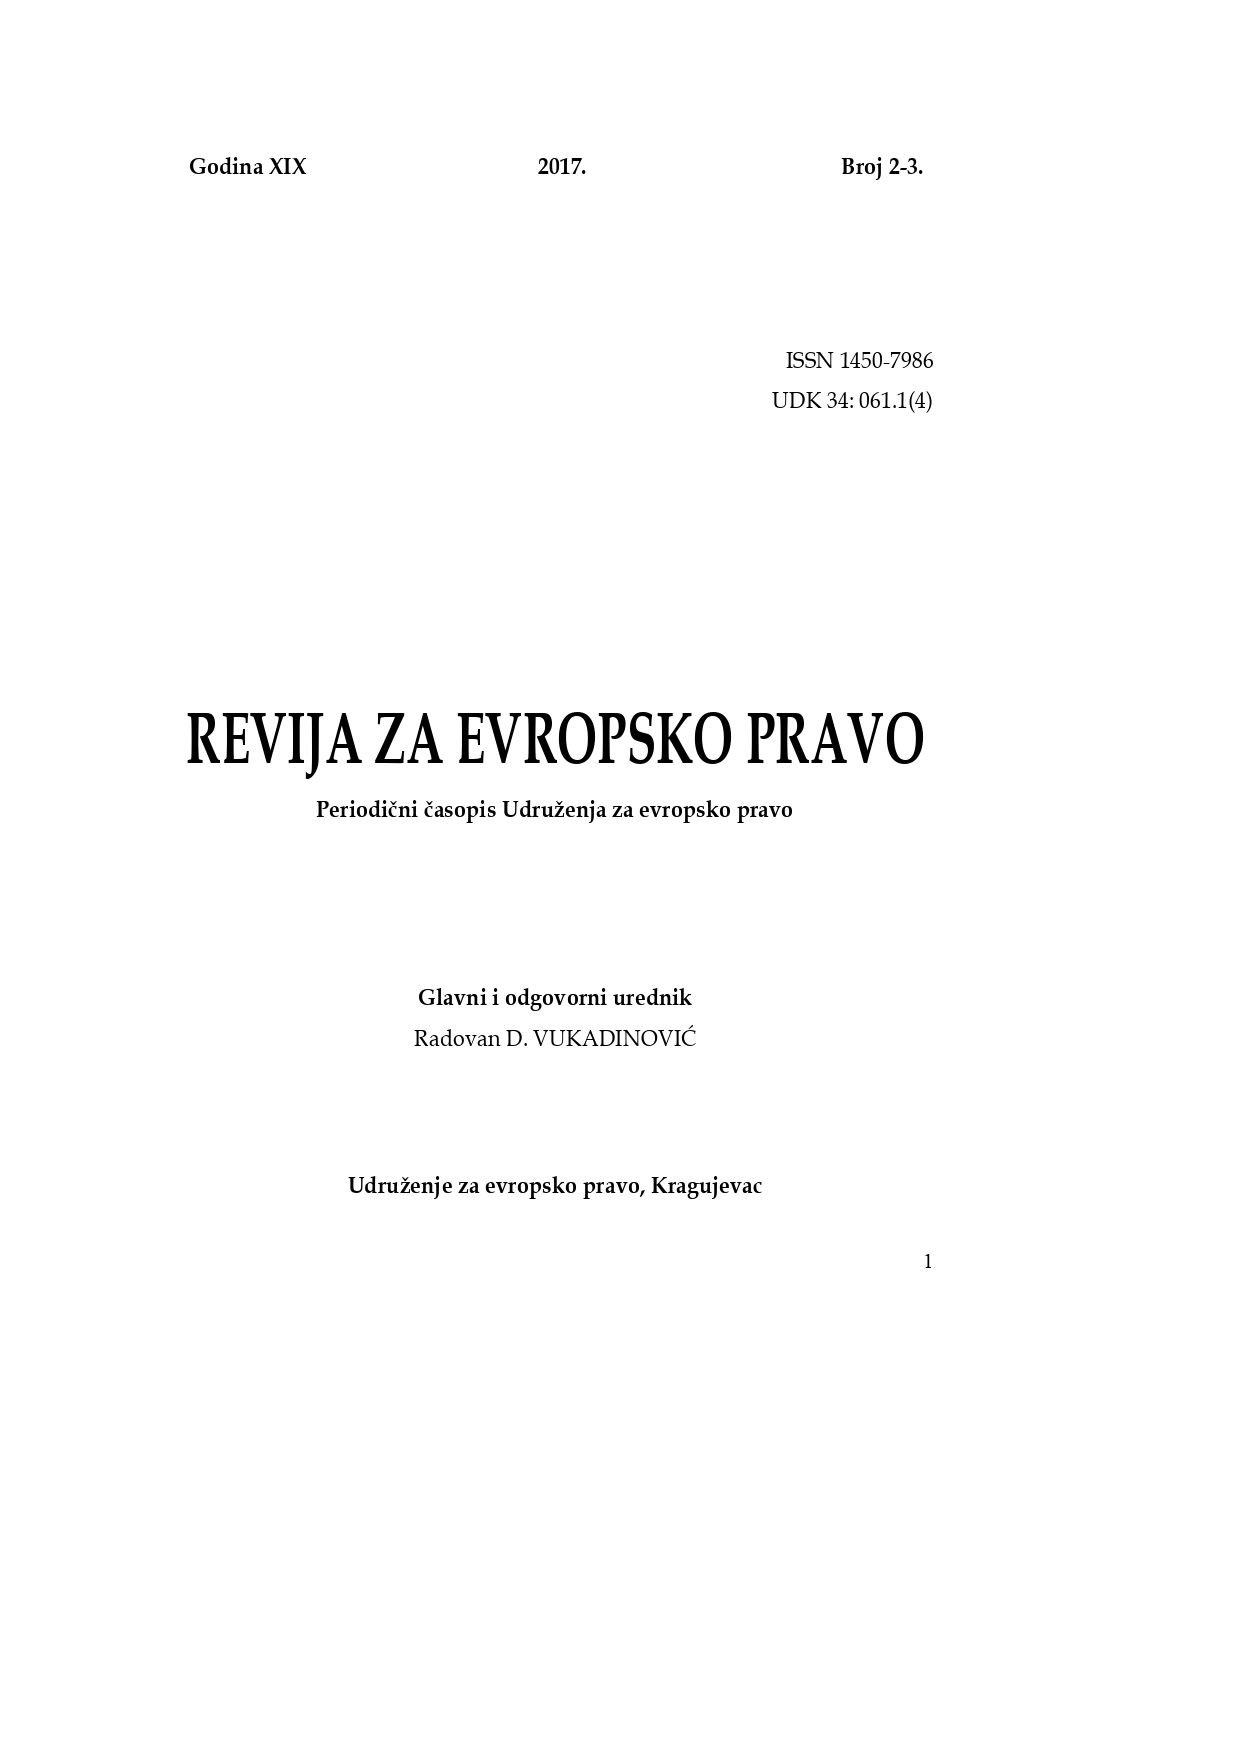 THE RIGHT OF CITIZENS OF THE EUROPEAN UNION ON ACQUISITON OF REAL ESTATE IN SERBIA Cover Image